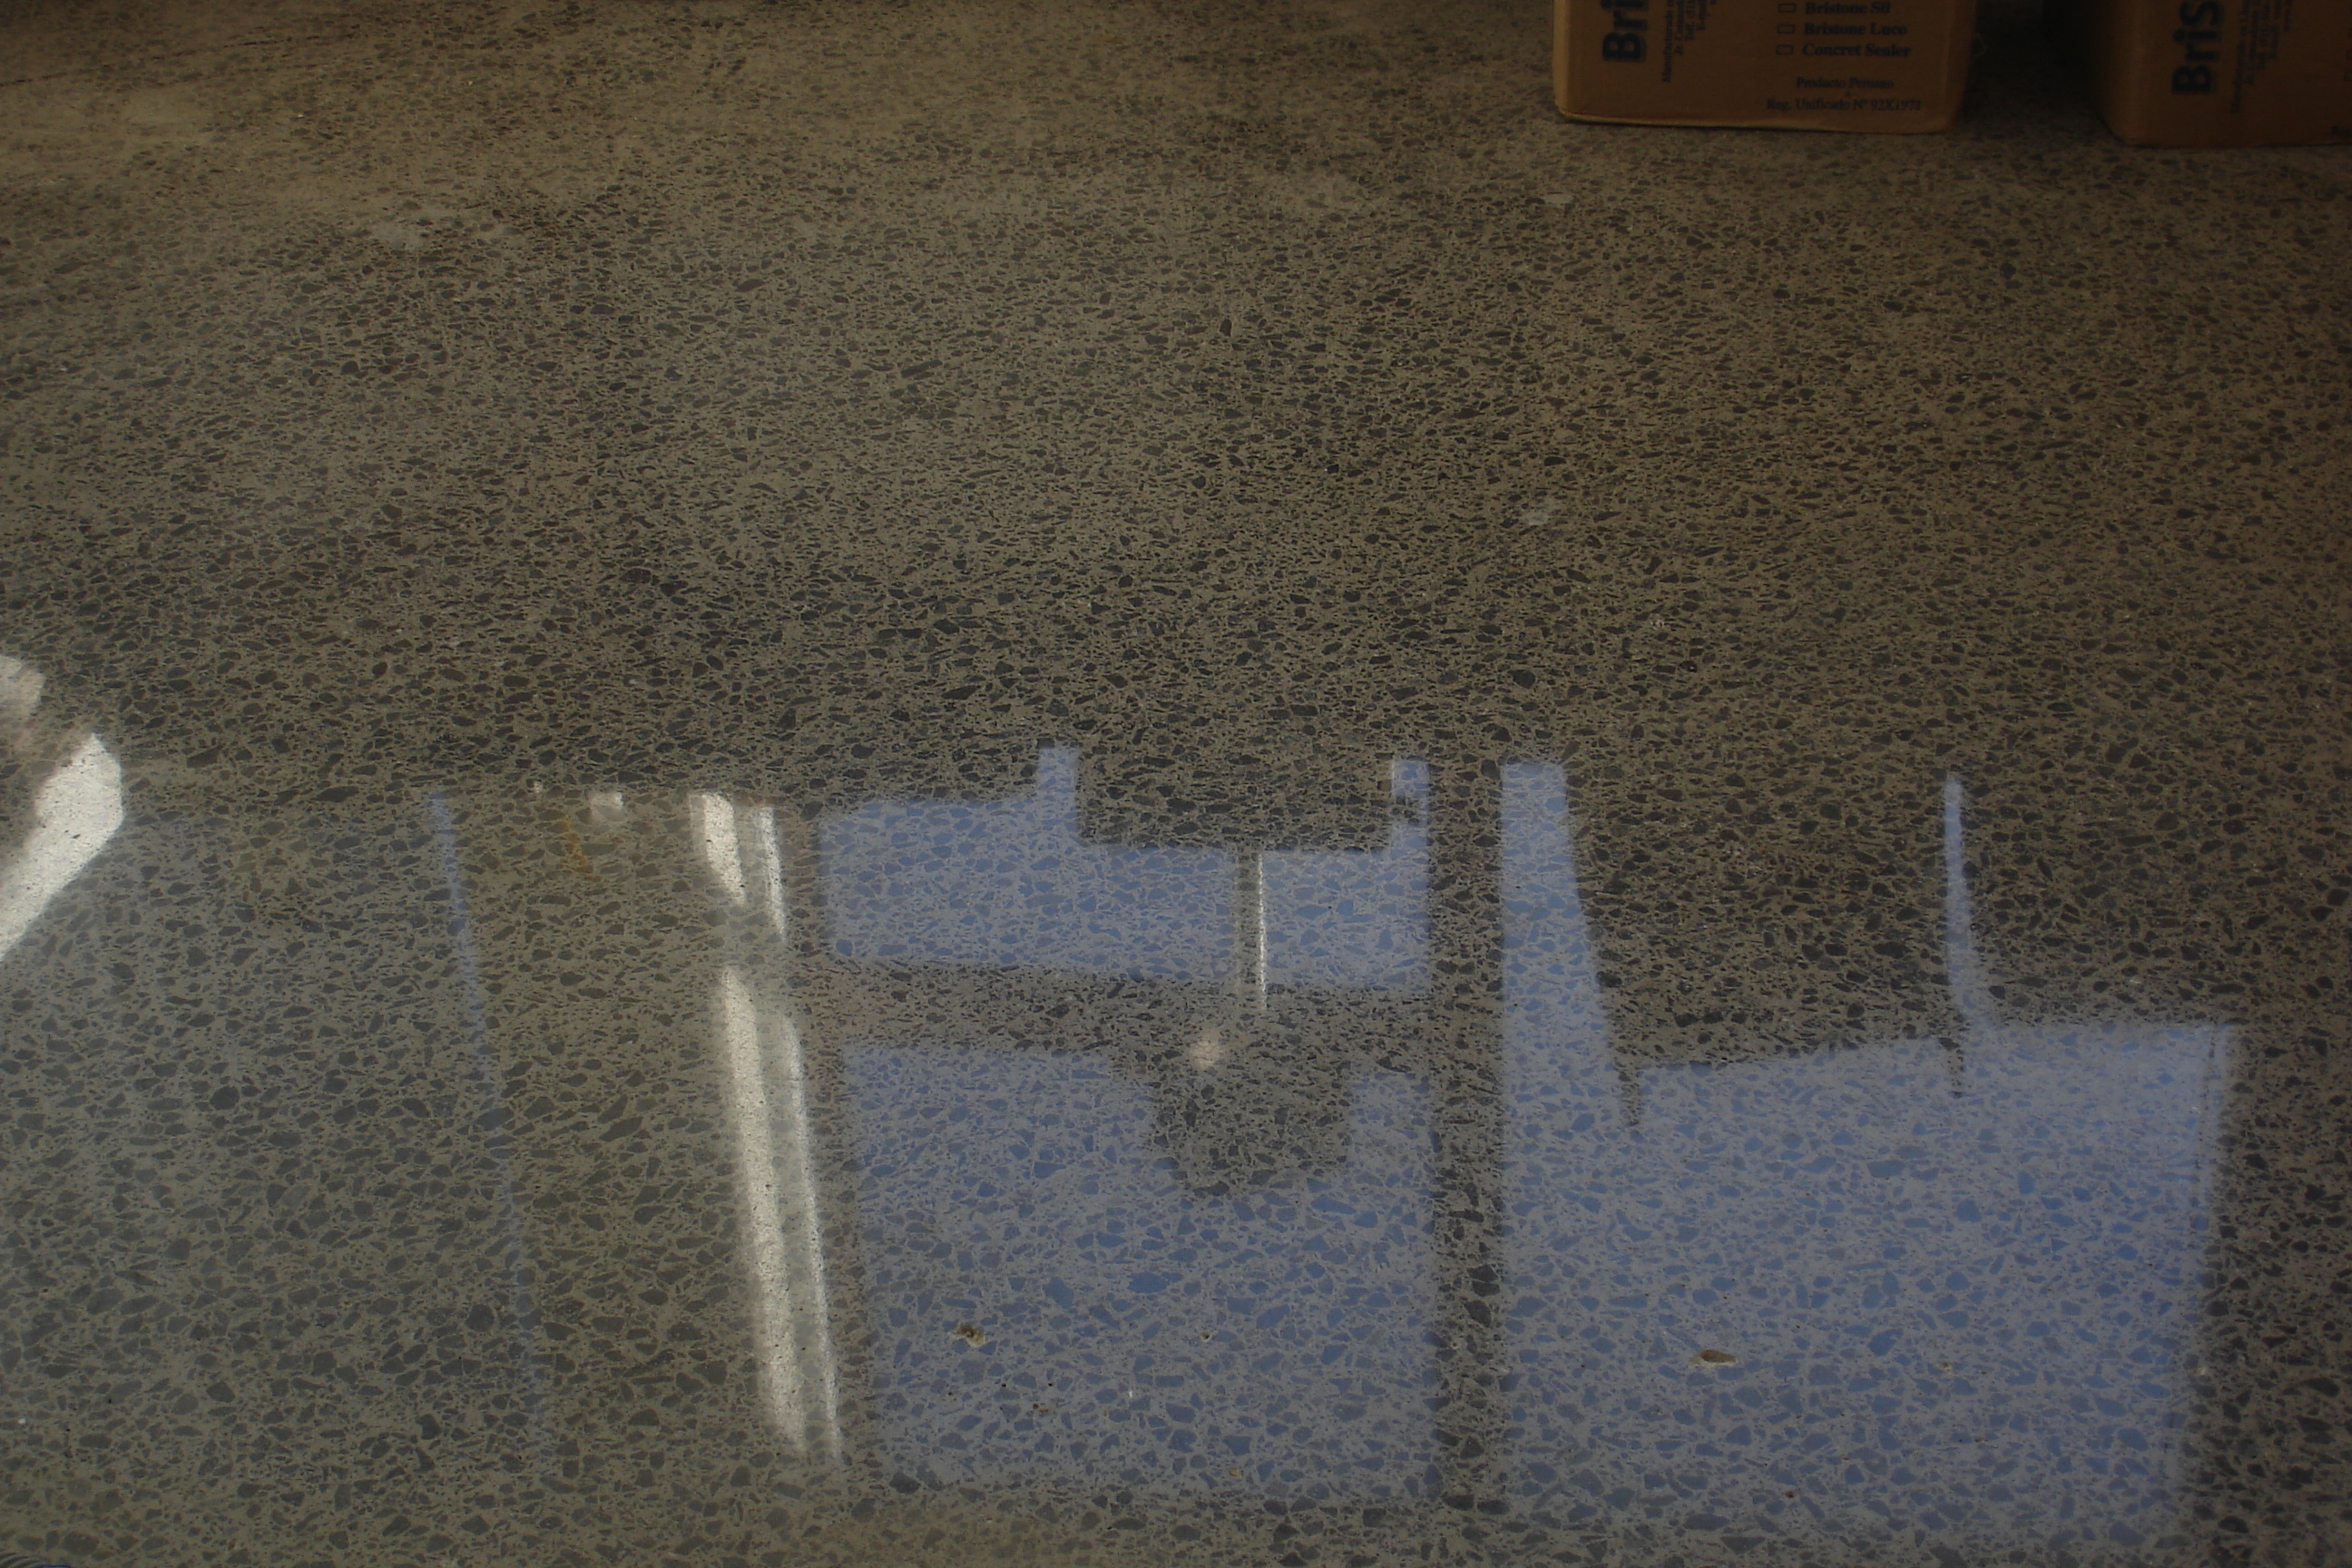 BriStone on honed and polished concrete, high traffic area and installed for over a year with no cleaning.